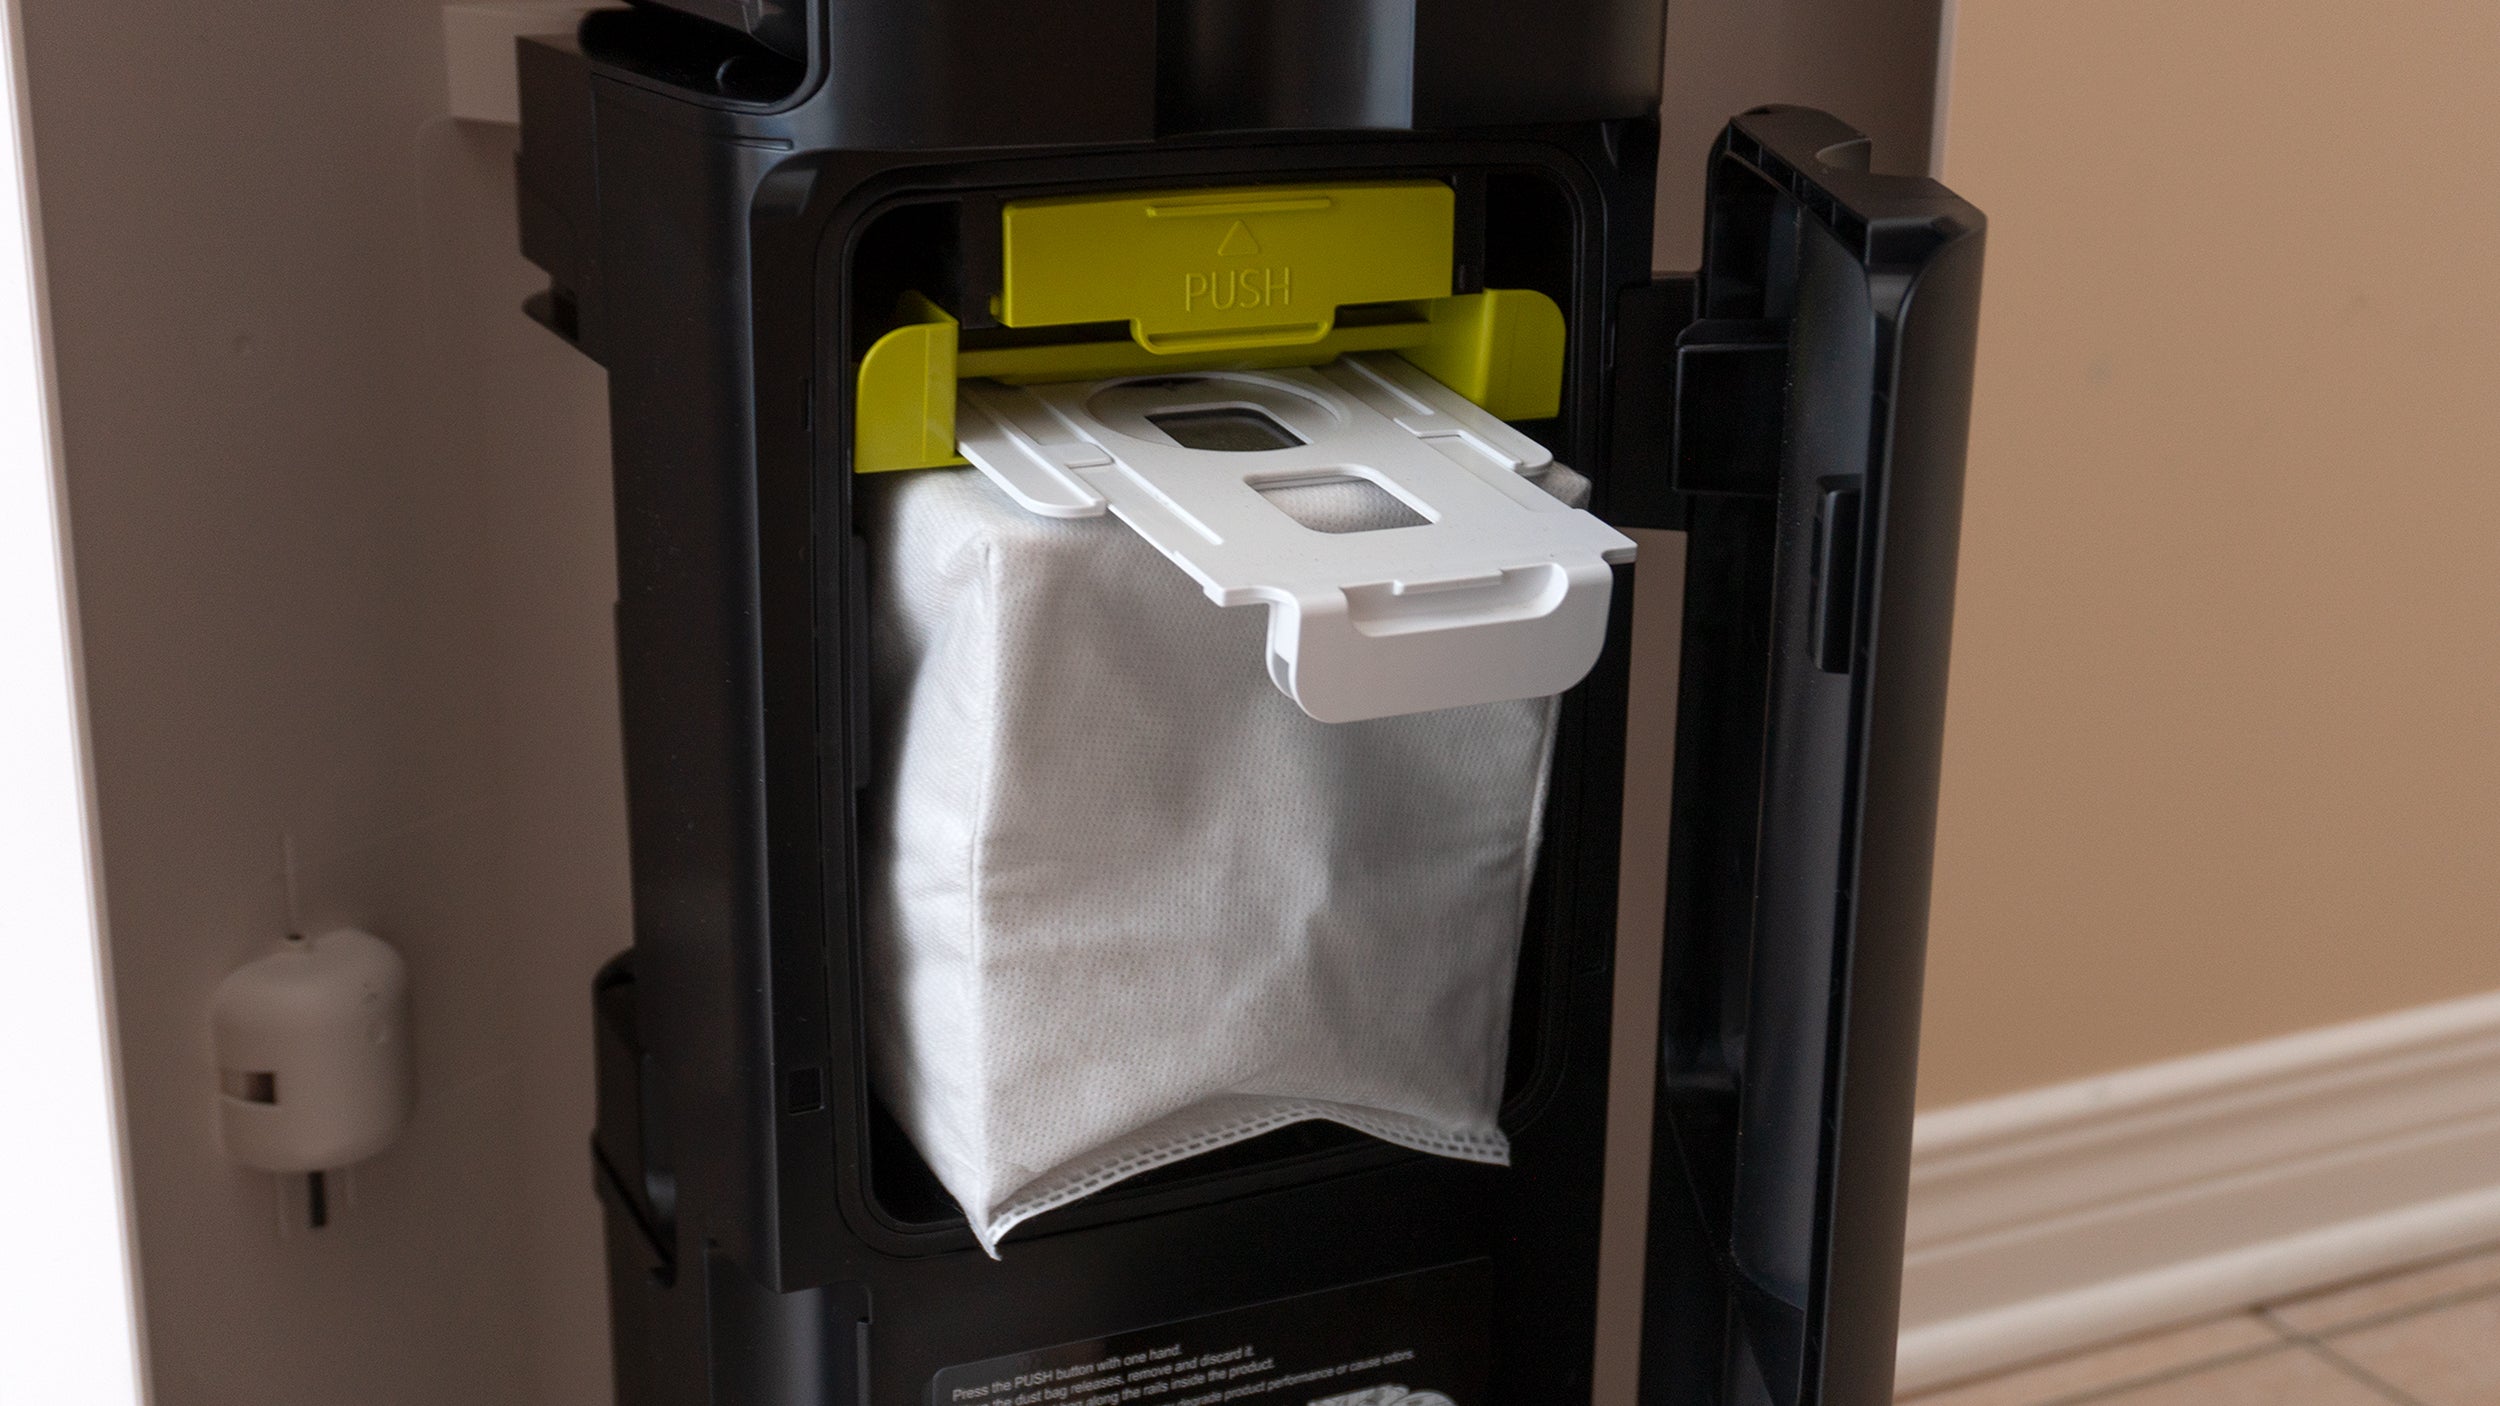 The cords are gone, but the A9 Kompressor+'s tower dock still uses disposable bags for collecting and disposing of dust and dirt. (Photo: Andrew Liszewski/Gizmodo)